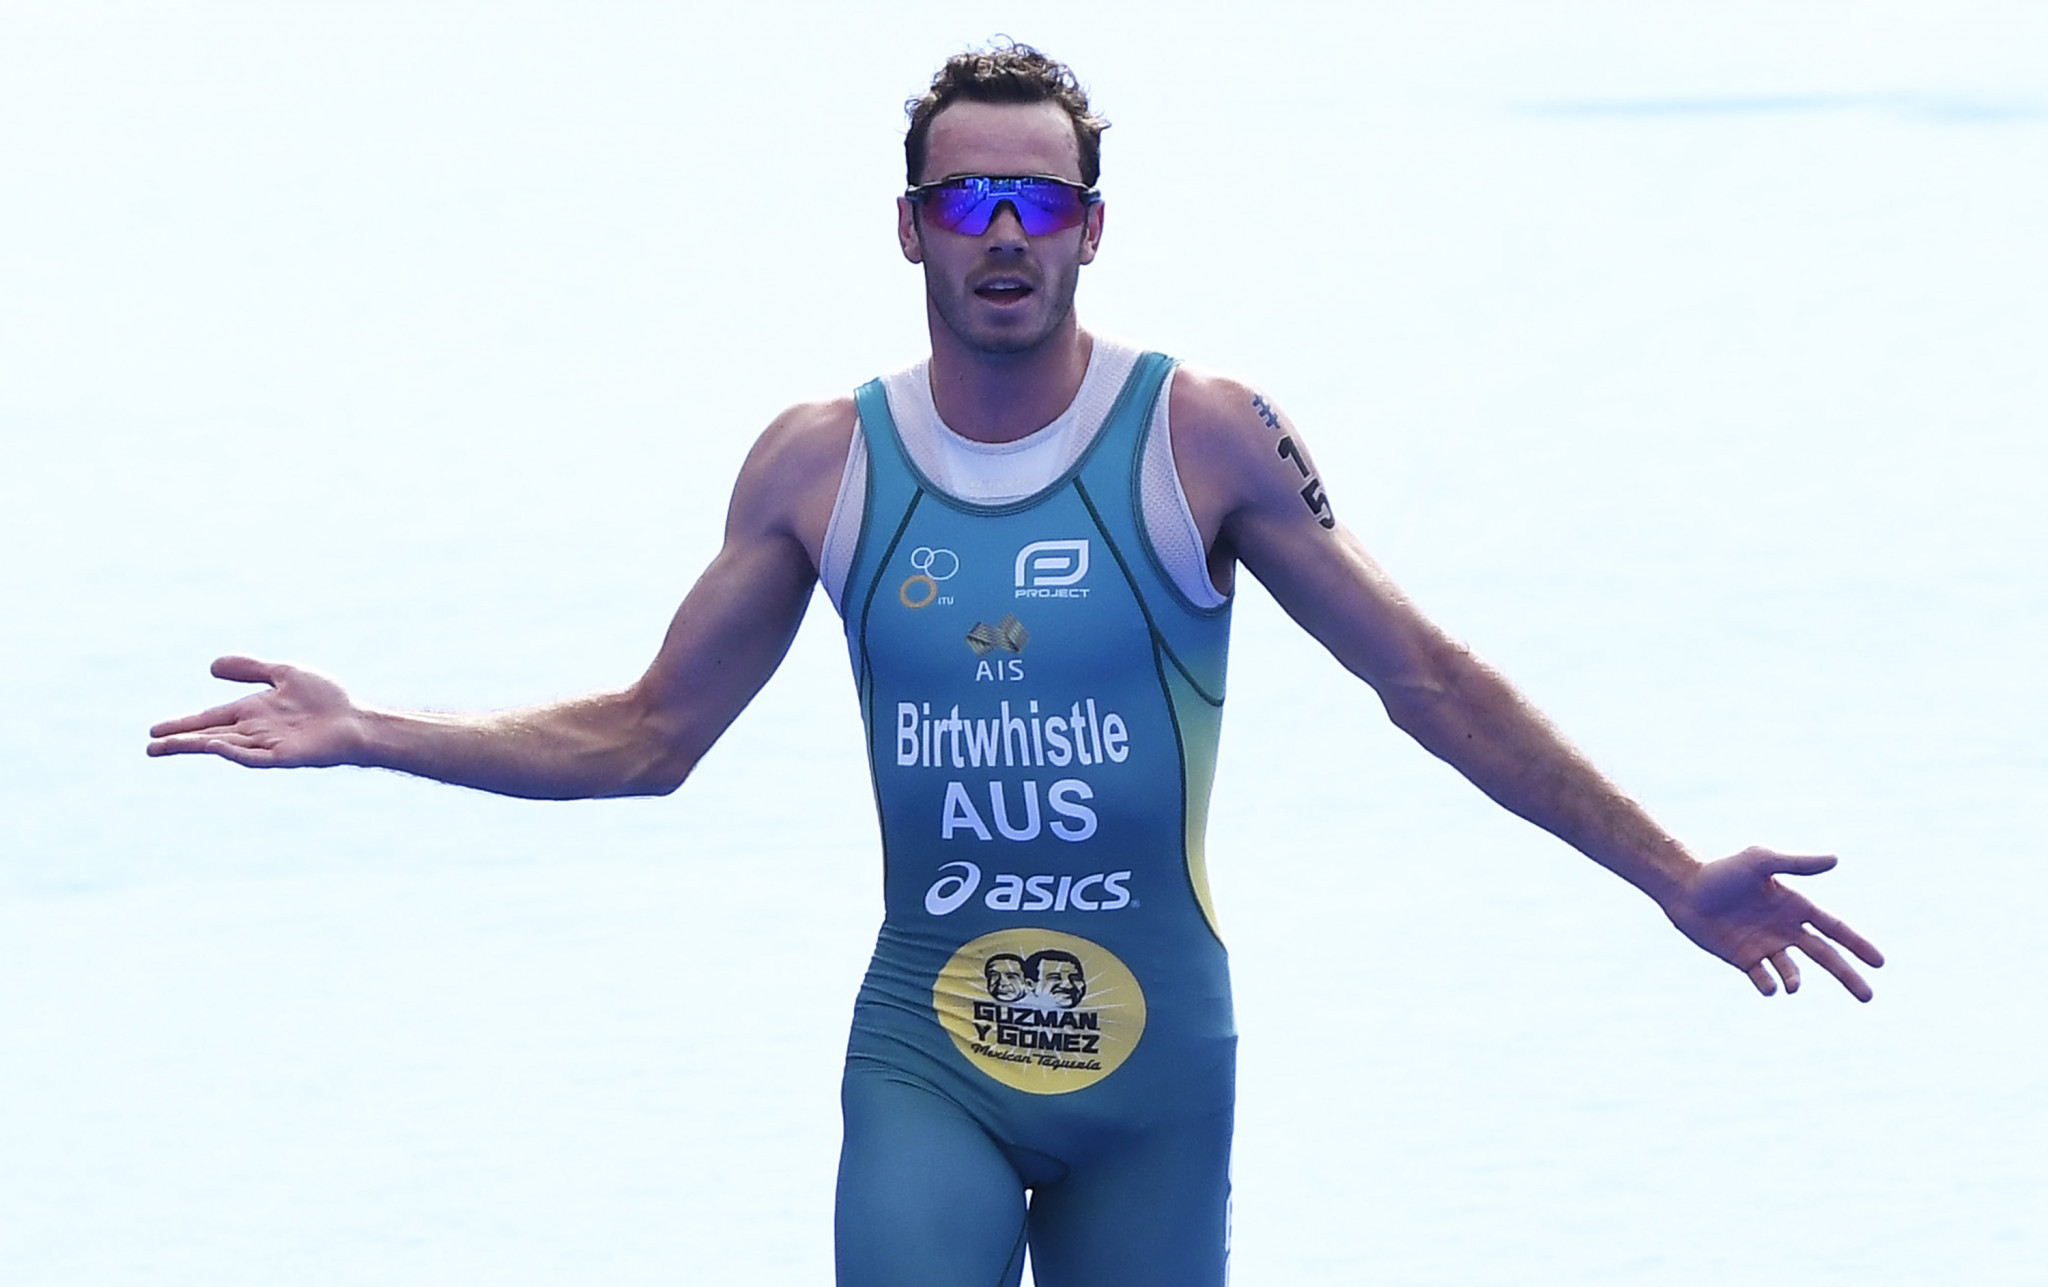 Australia's Jacob Birtwhistle triumphed in a dramatic men's race ©Getty Images